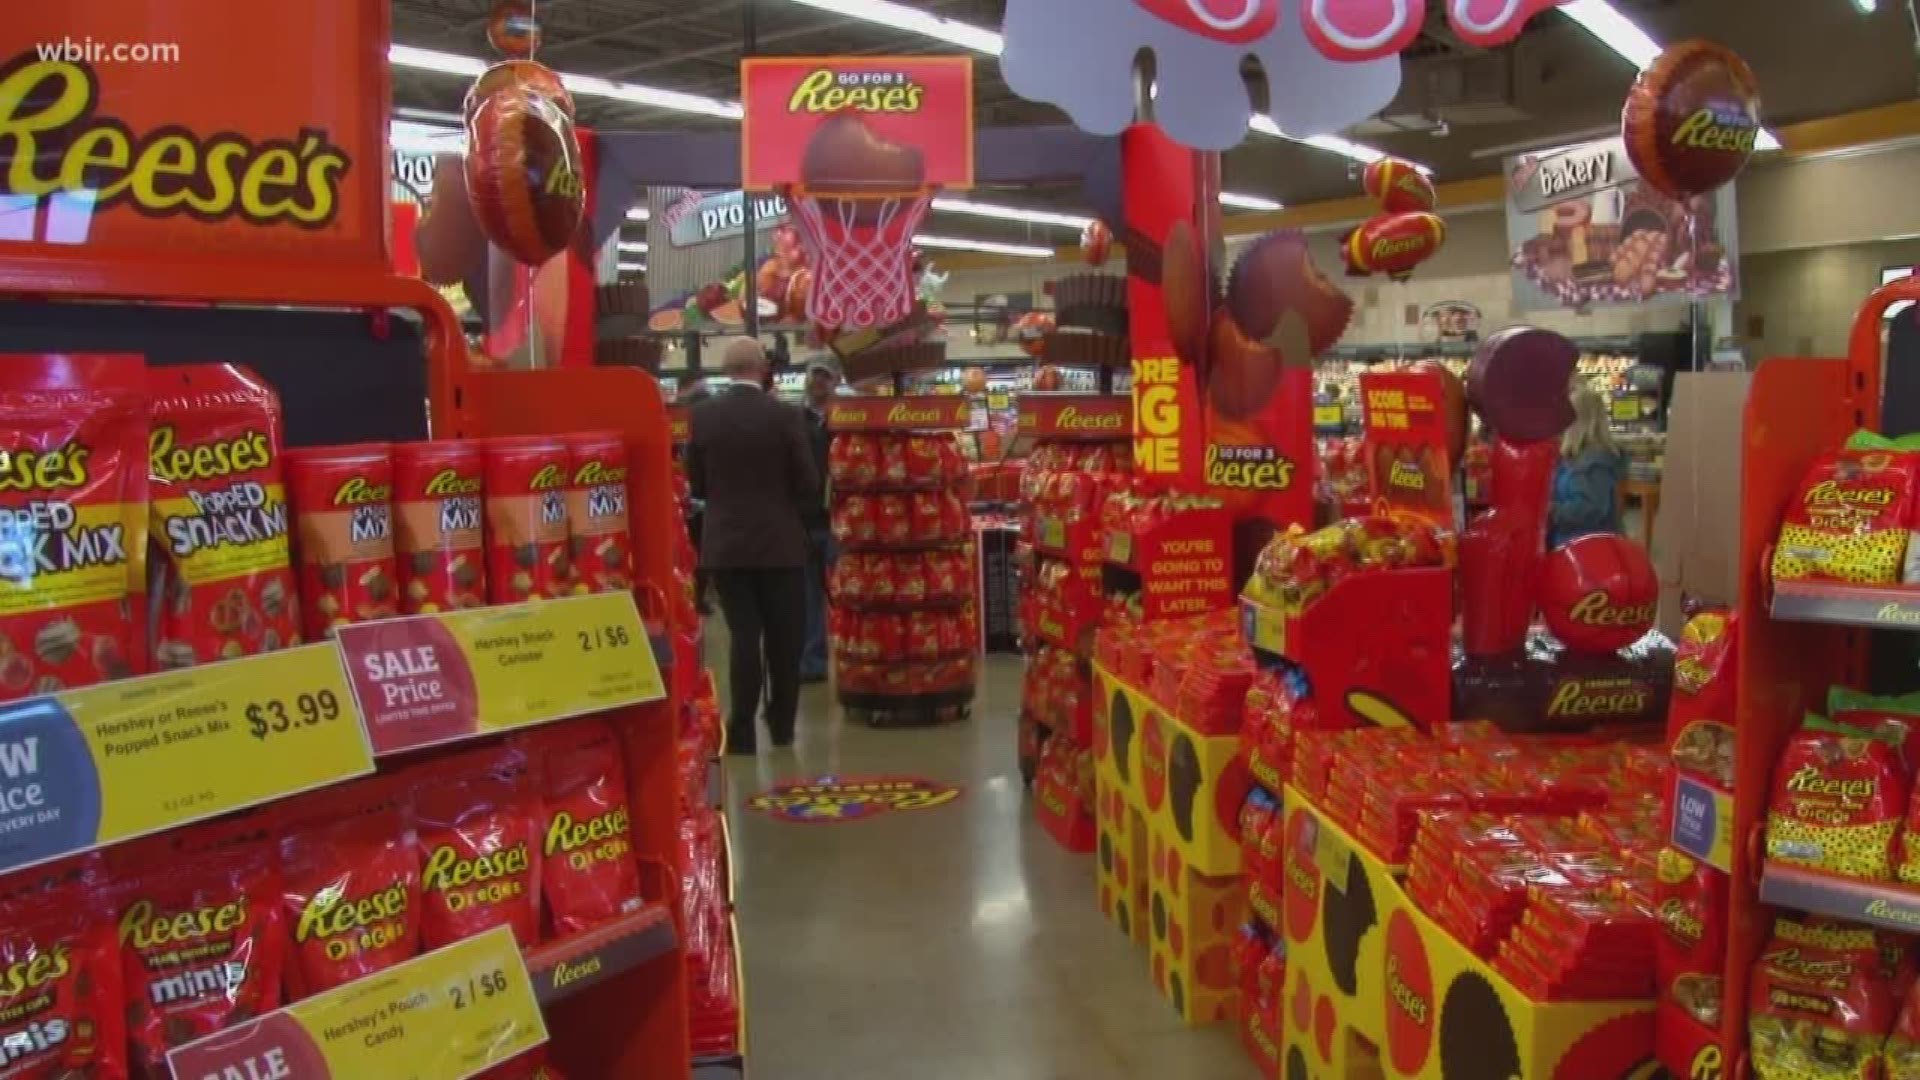 World's Greatest Reese's Display' is at Knoxville's Food City right now